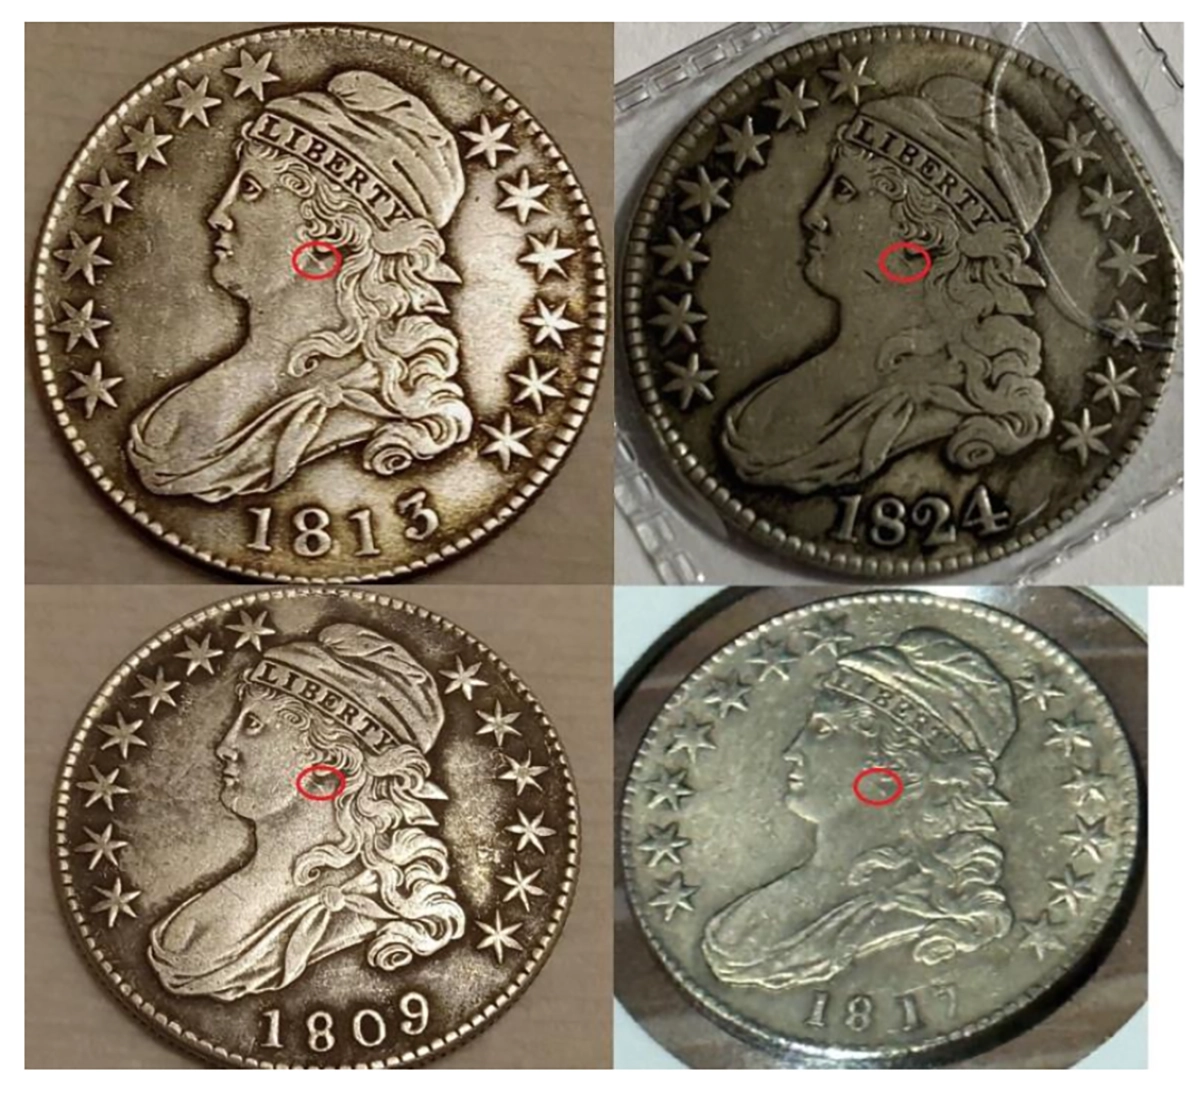 Additional different dated examples previously for sale on eBay.